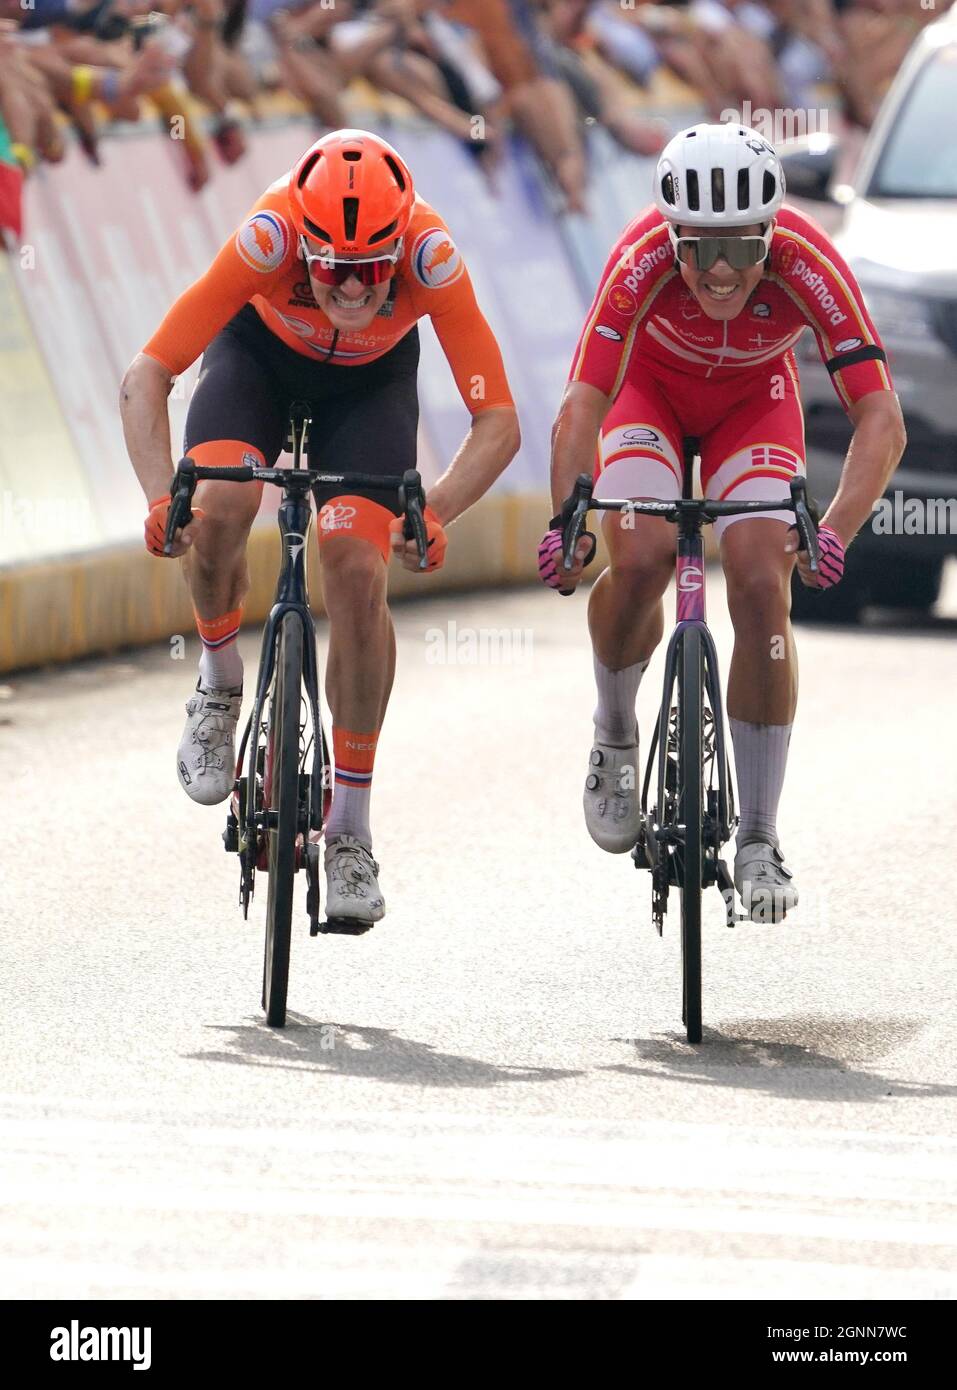 Dylan Van Baarle (NED) Michael Valgren Hundahl (DEN) pictured at the finish of the elite men road race of the UCI World Championships Road Cycling Flanders 2021 on Sunday 26 September 2021 at Leuven in Belgium. Photo by SCS/Soenar Chamid/AFLO (HOLLAND OUT) Stock Photo